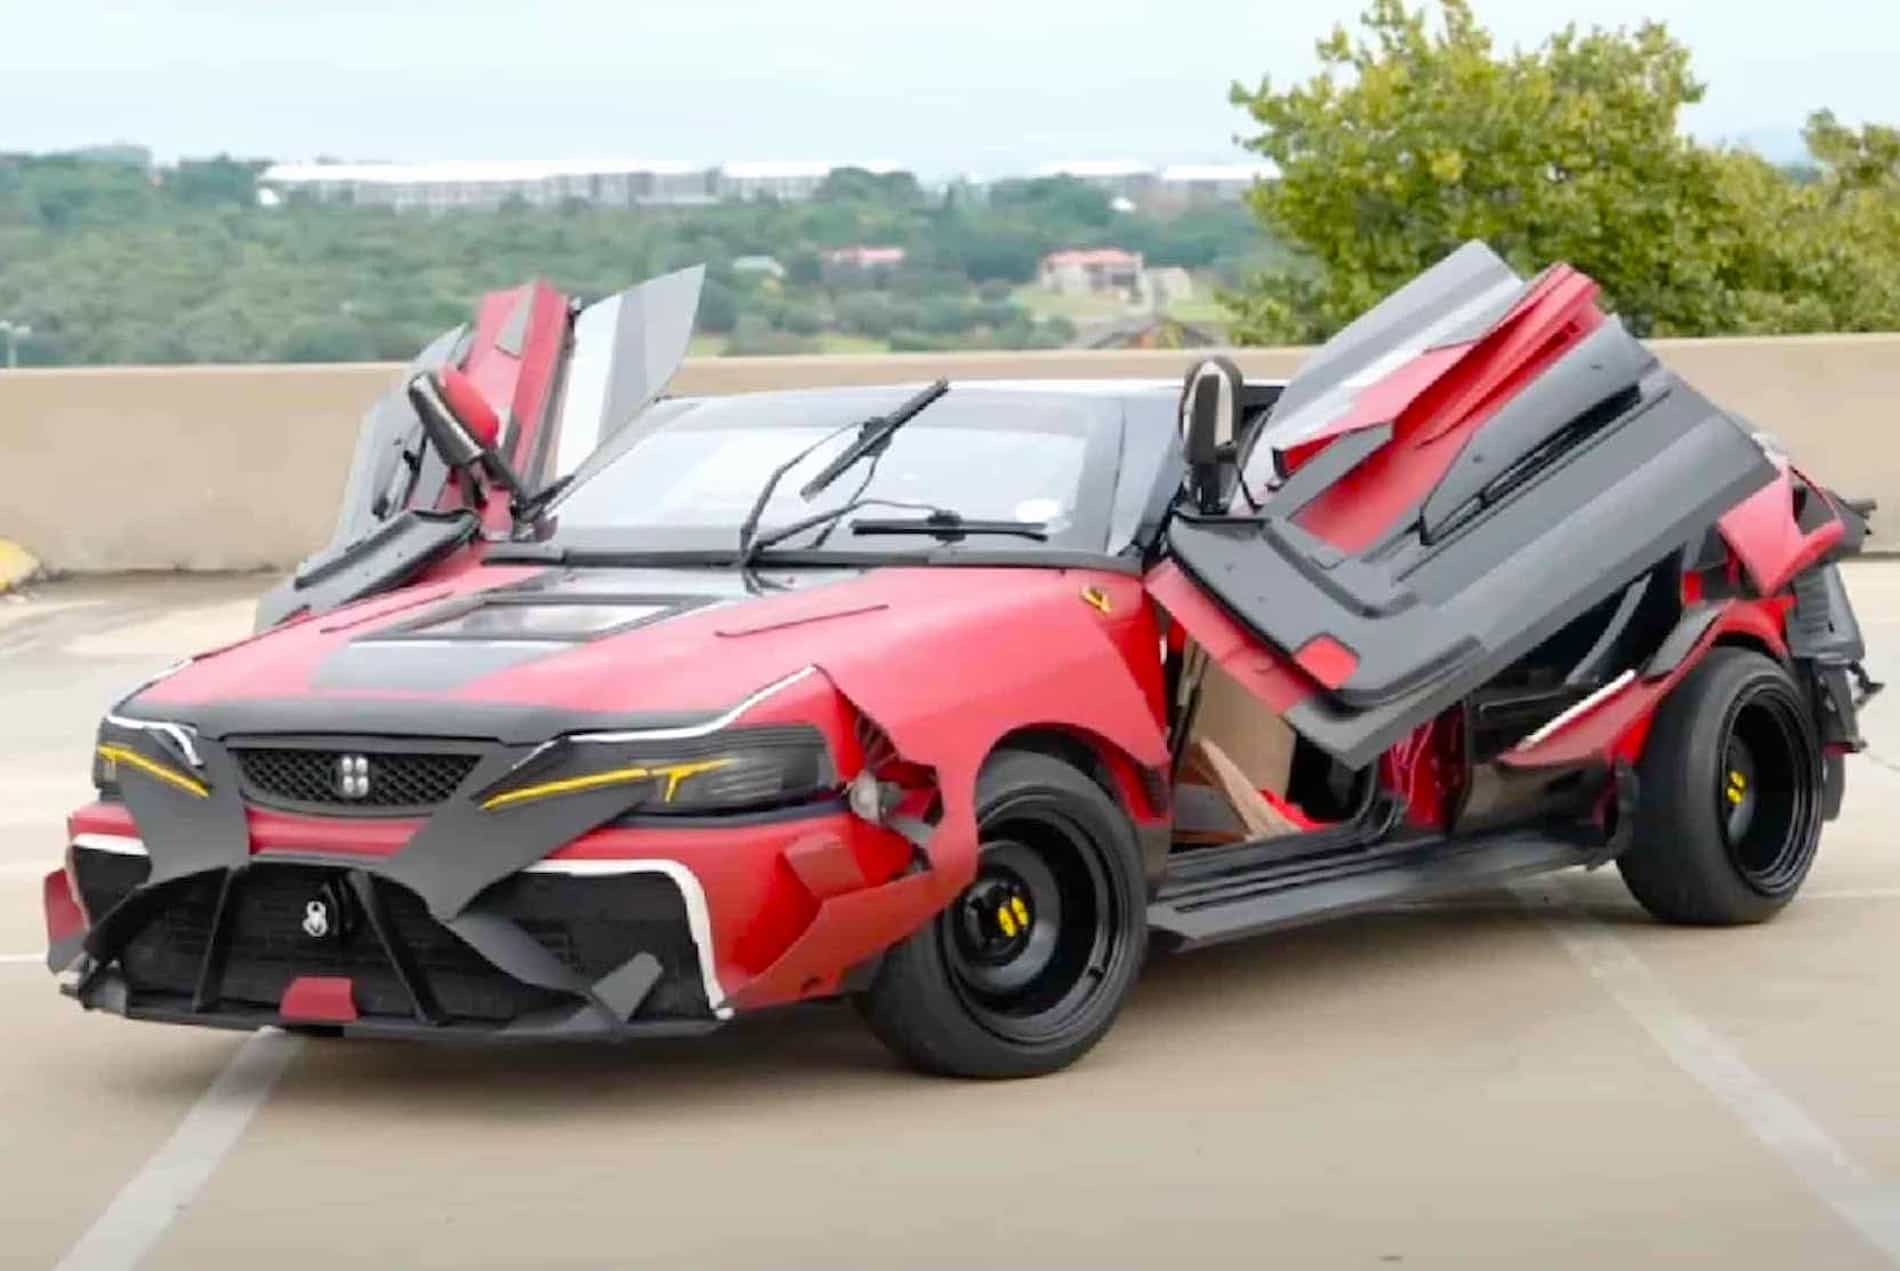 Front angle view of customized Toyota Corolla that looks like Tesla Model X Transformers robot 1